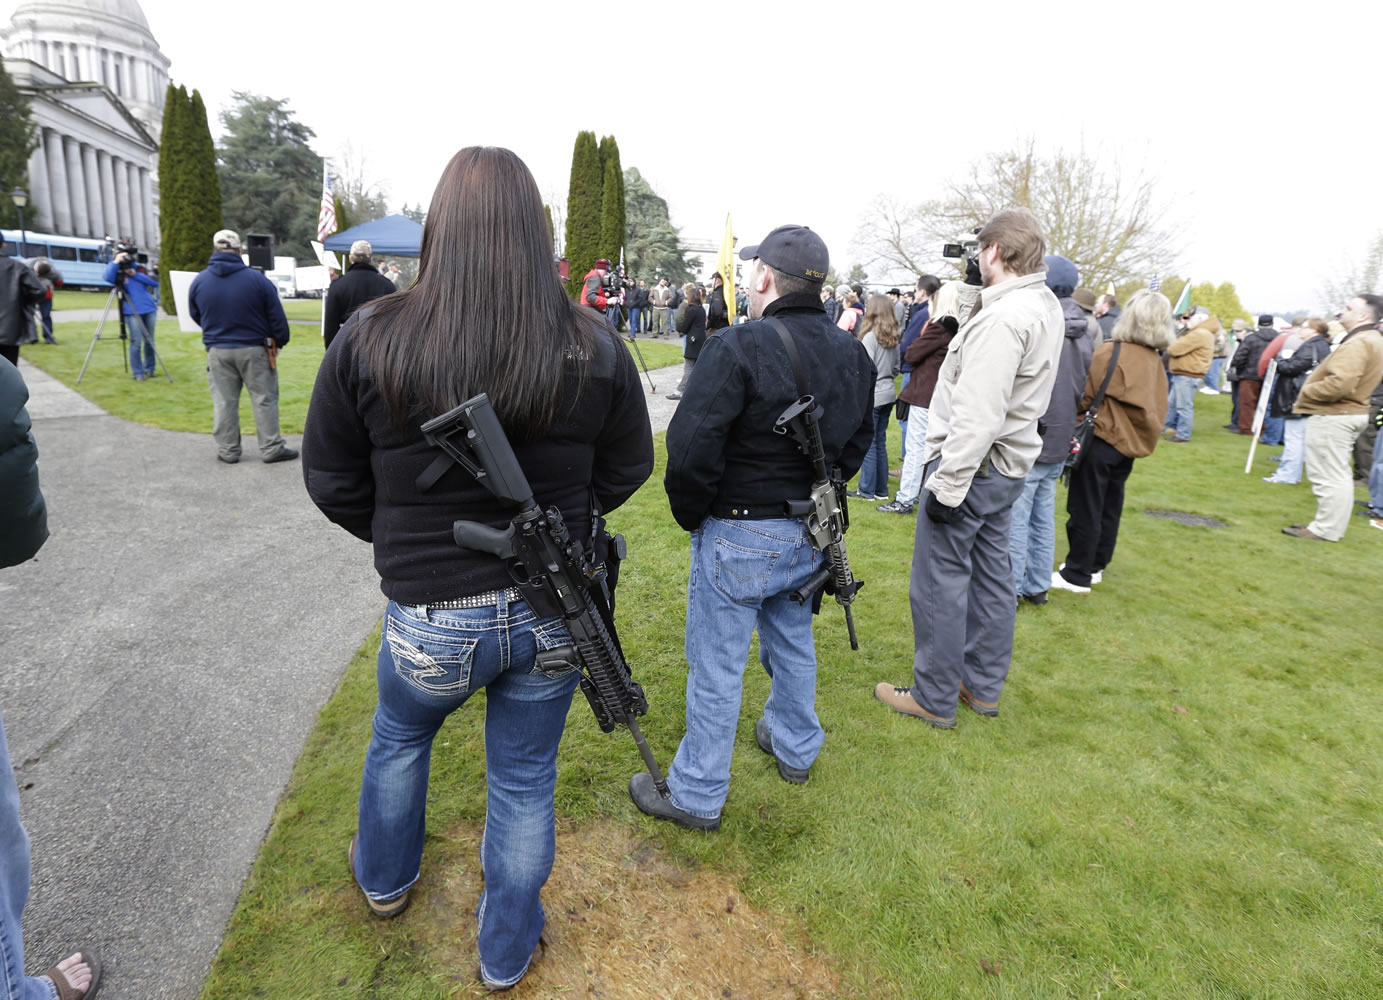 Laura Huff, left, of Lacey, and Mike McCoy, second from right, wear M4 rifles during a gun rights rally Feb. 8, 2013, at the Capitol in Olympia.